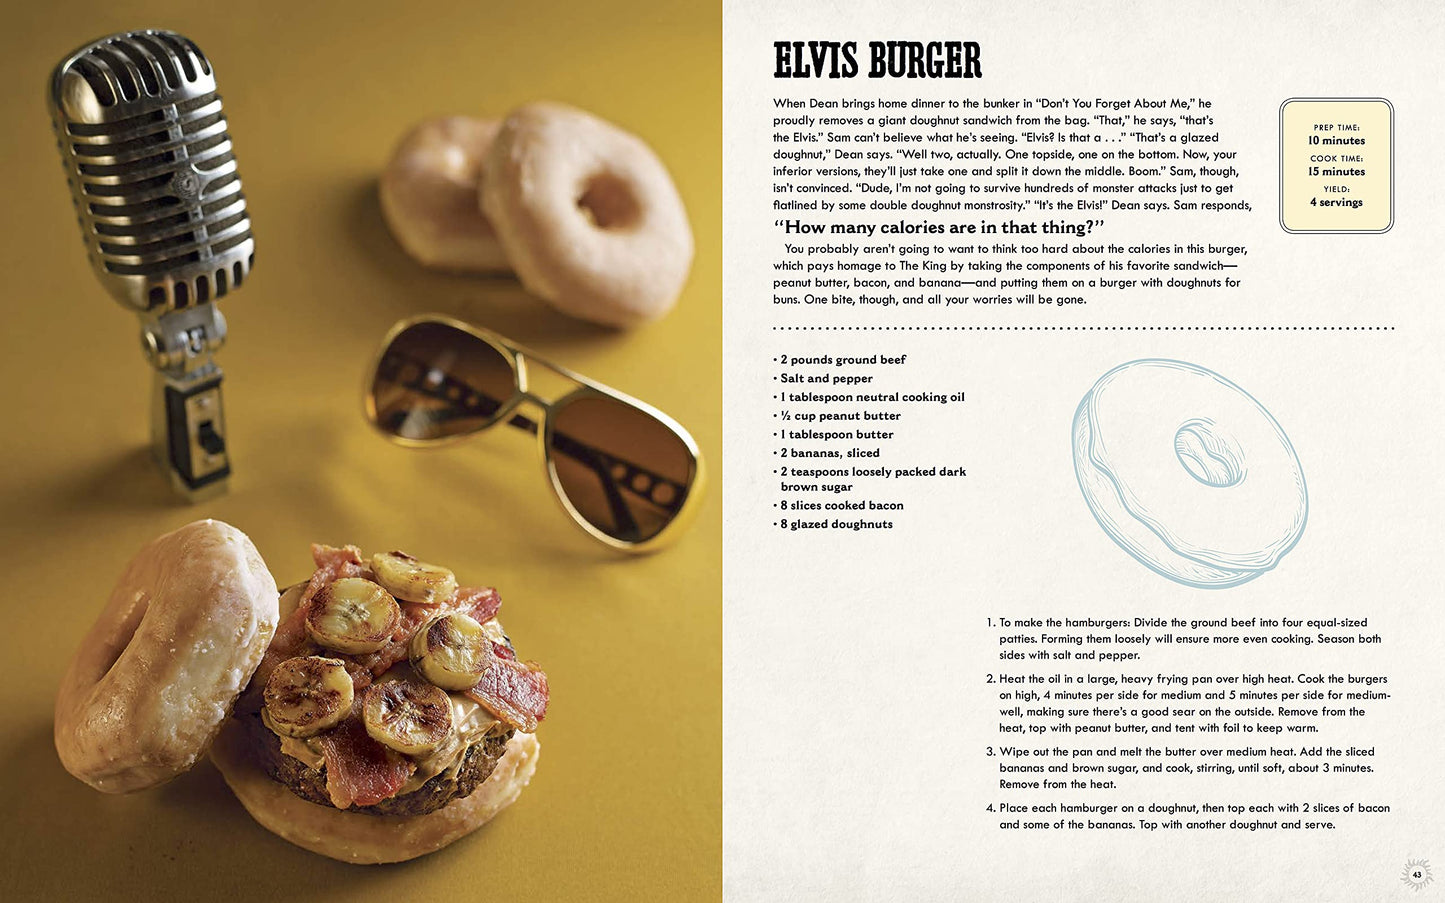 Load image into Gallery viewer, A two-page spread from the book. On the left is a a cheeseburger between two donuts, topped with bananas and bacon, on a yellow background. Next to the burger are a microphone, a pair of gold-rimmed sunglasses, and two donuts. On the right is a recipe for the Elvis Burger.
